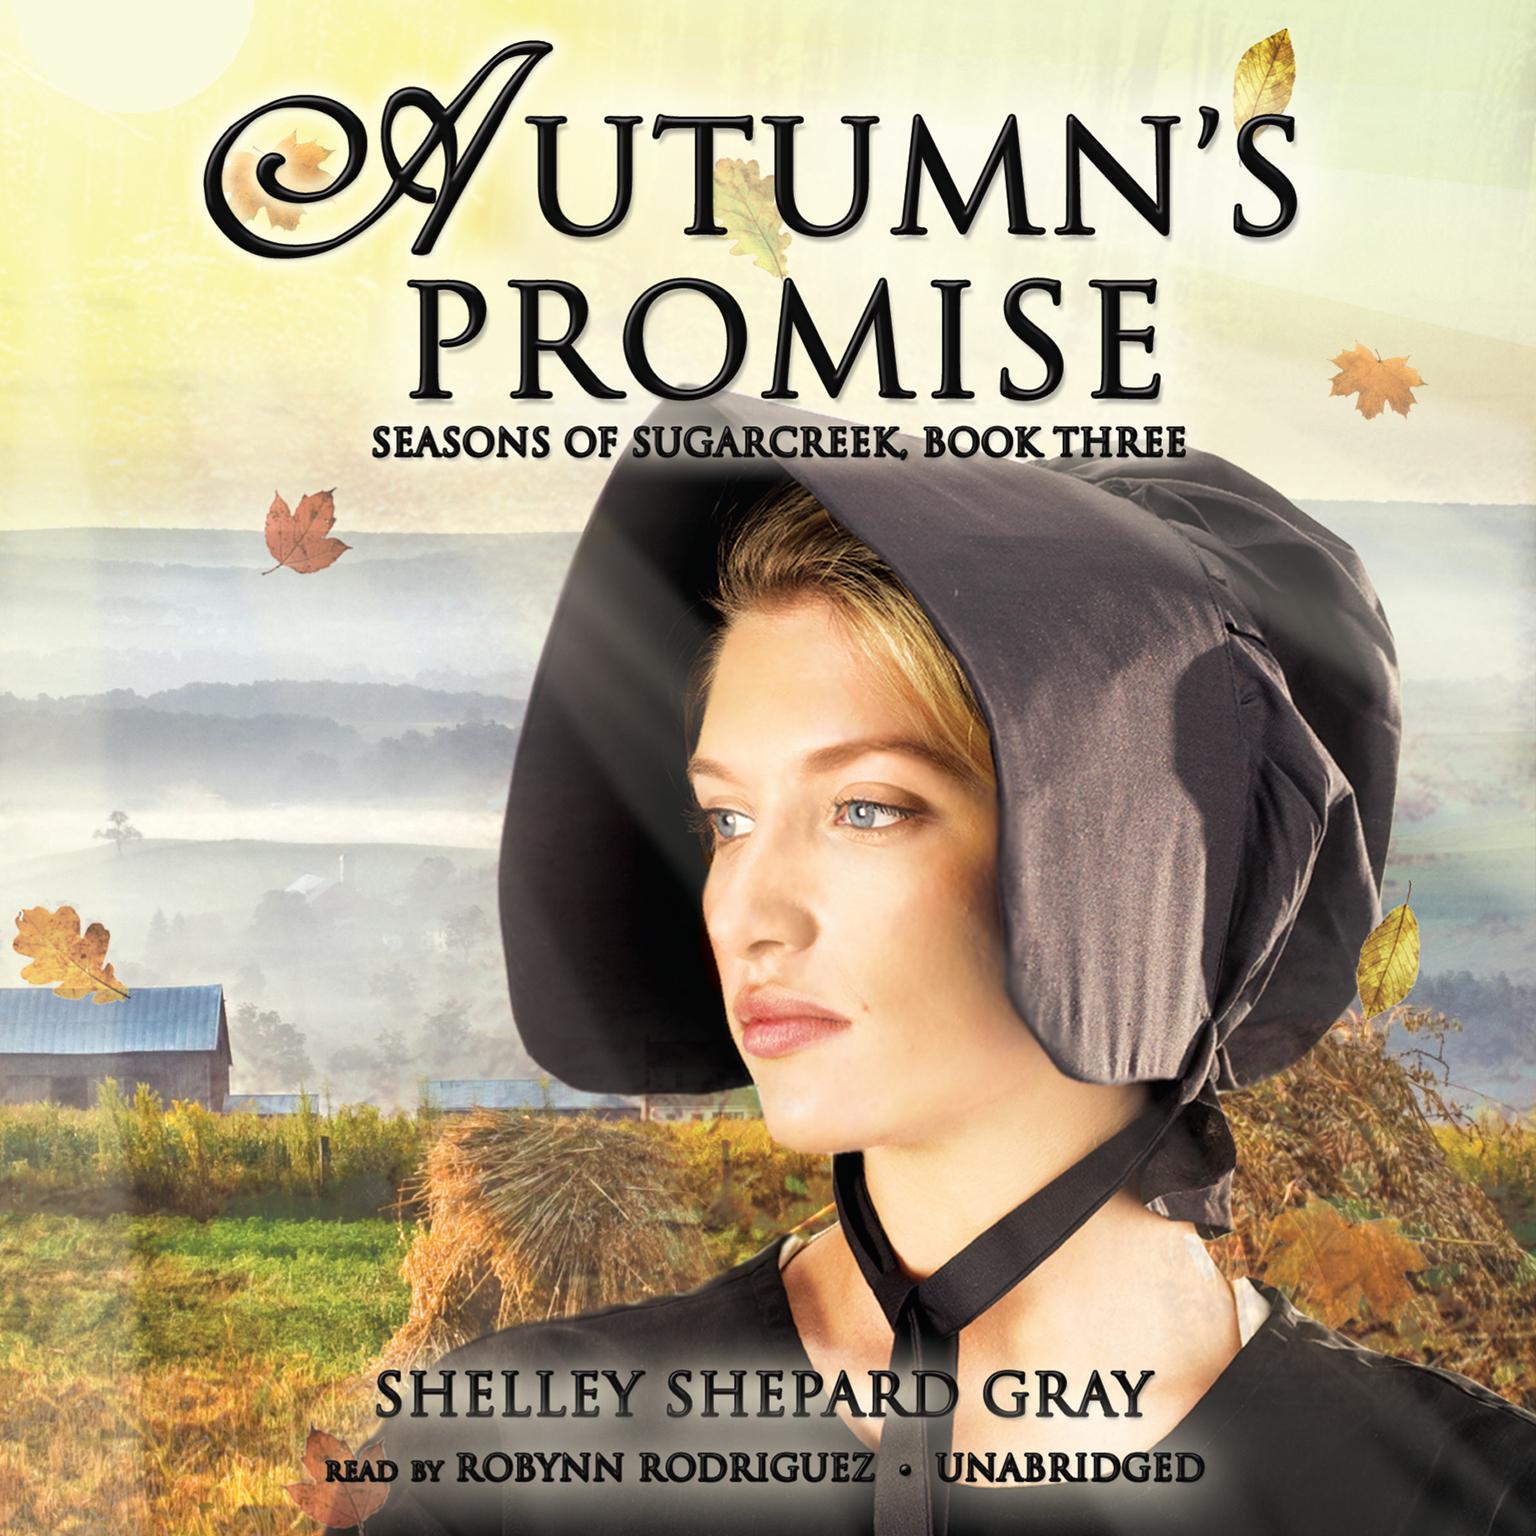 Autumn’s Promise: Seasons of Sugarcreek, Book Three Audiobook, by Shelley Shepard Gray